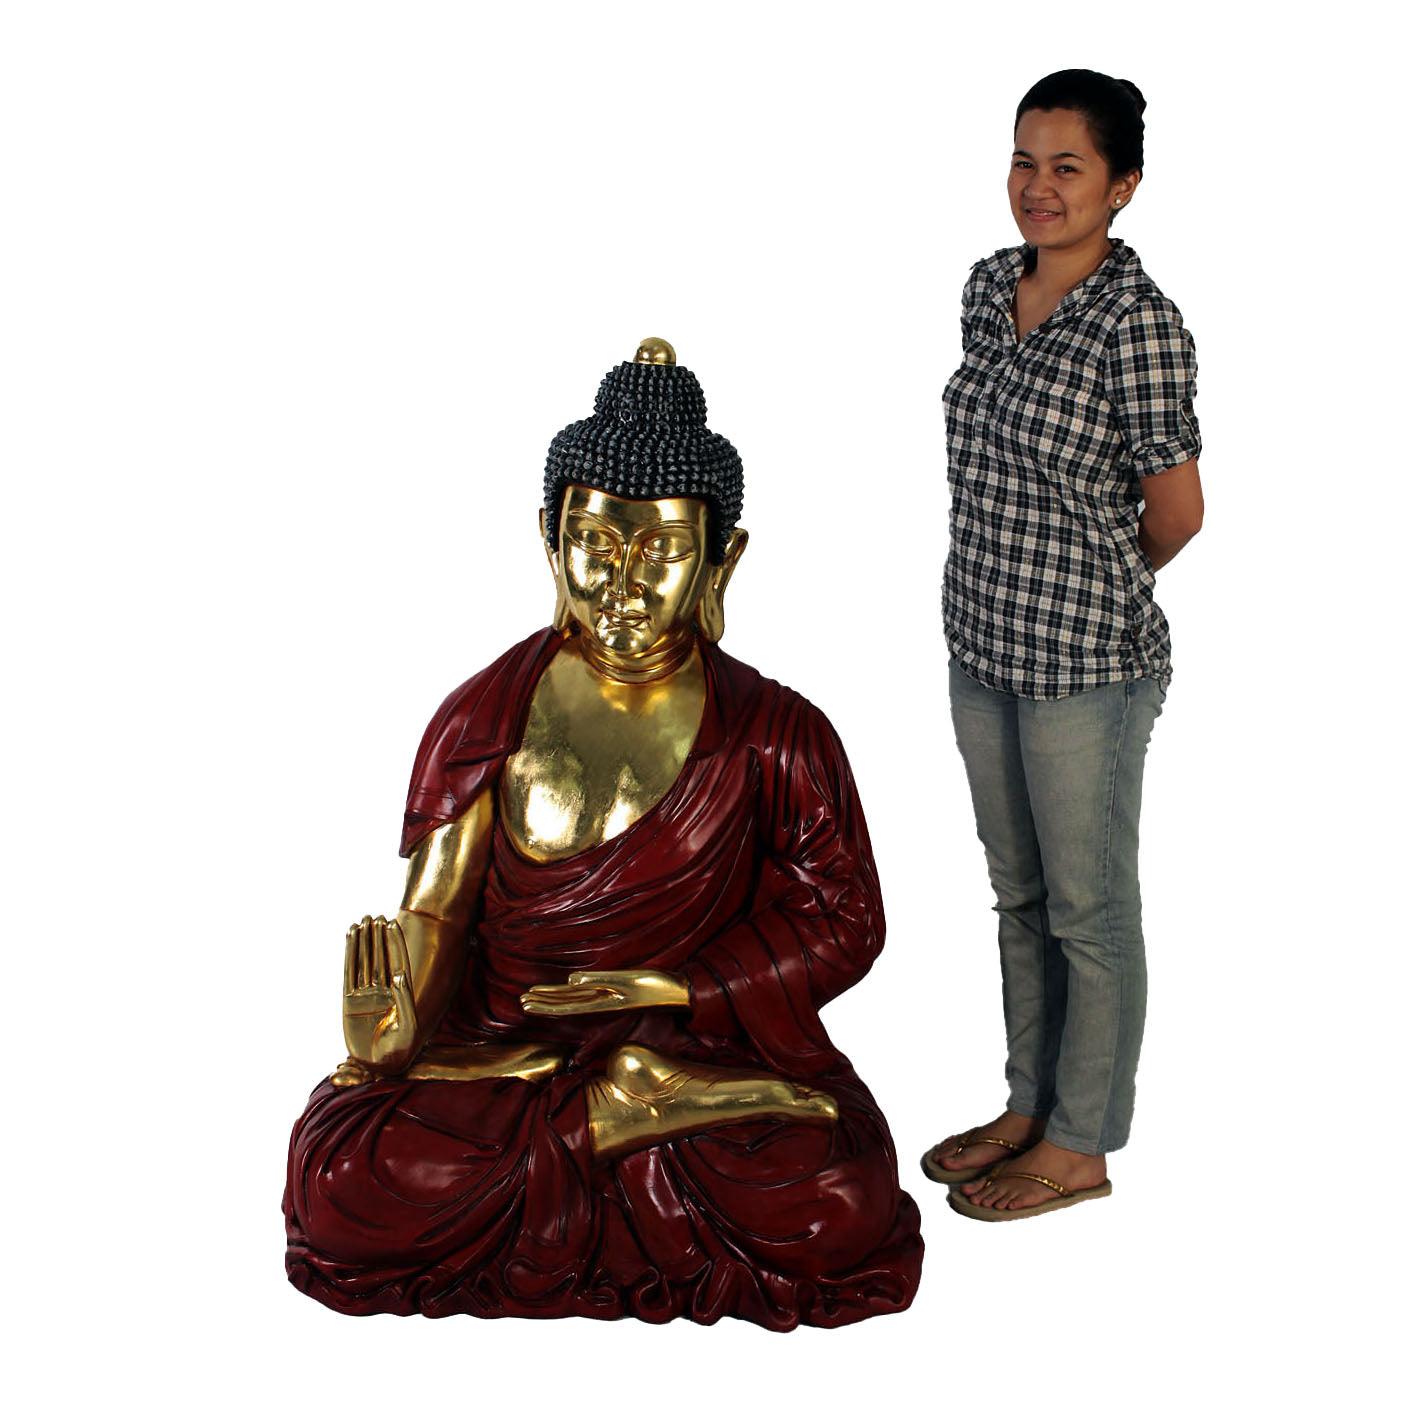 Sitting Gold and Red Buddha Statue - LM Treasures Prop Rentals 